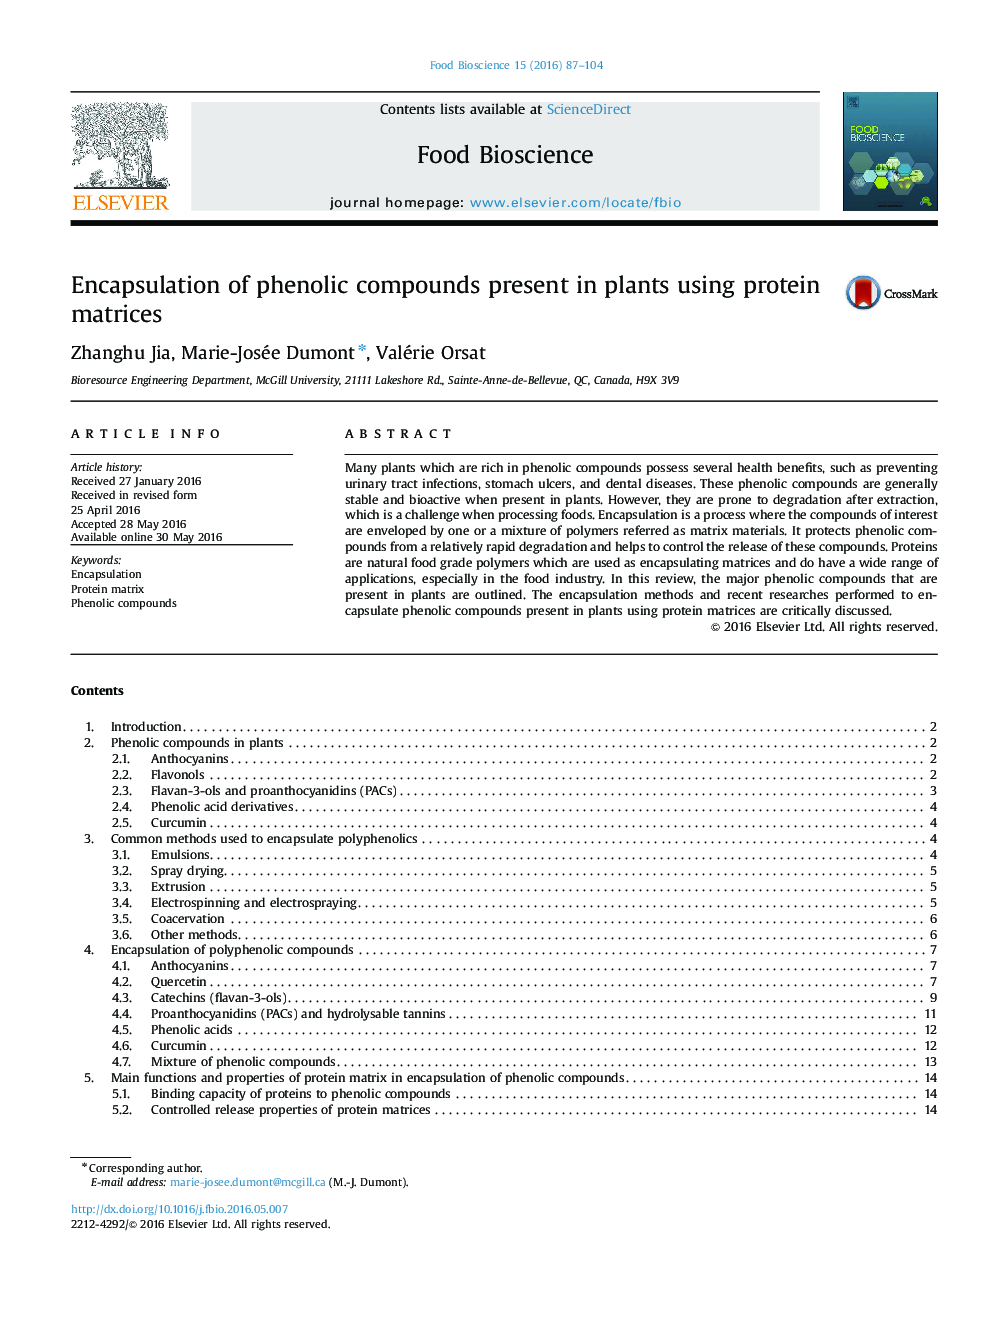 Encapsulation of phenolic compounds present in plants using protein matrices